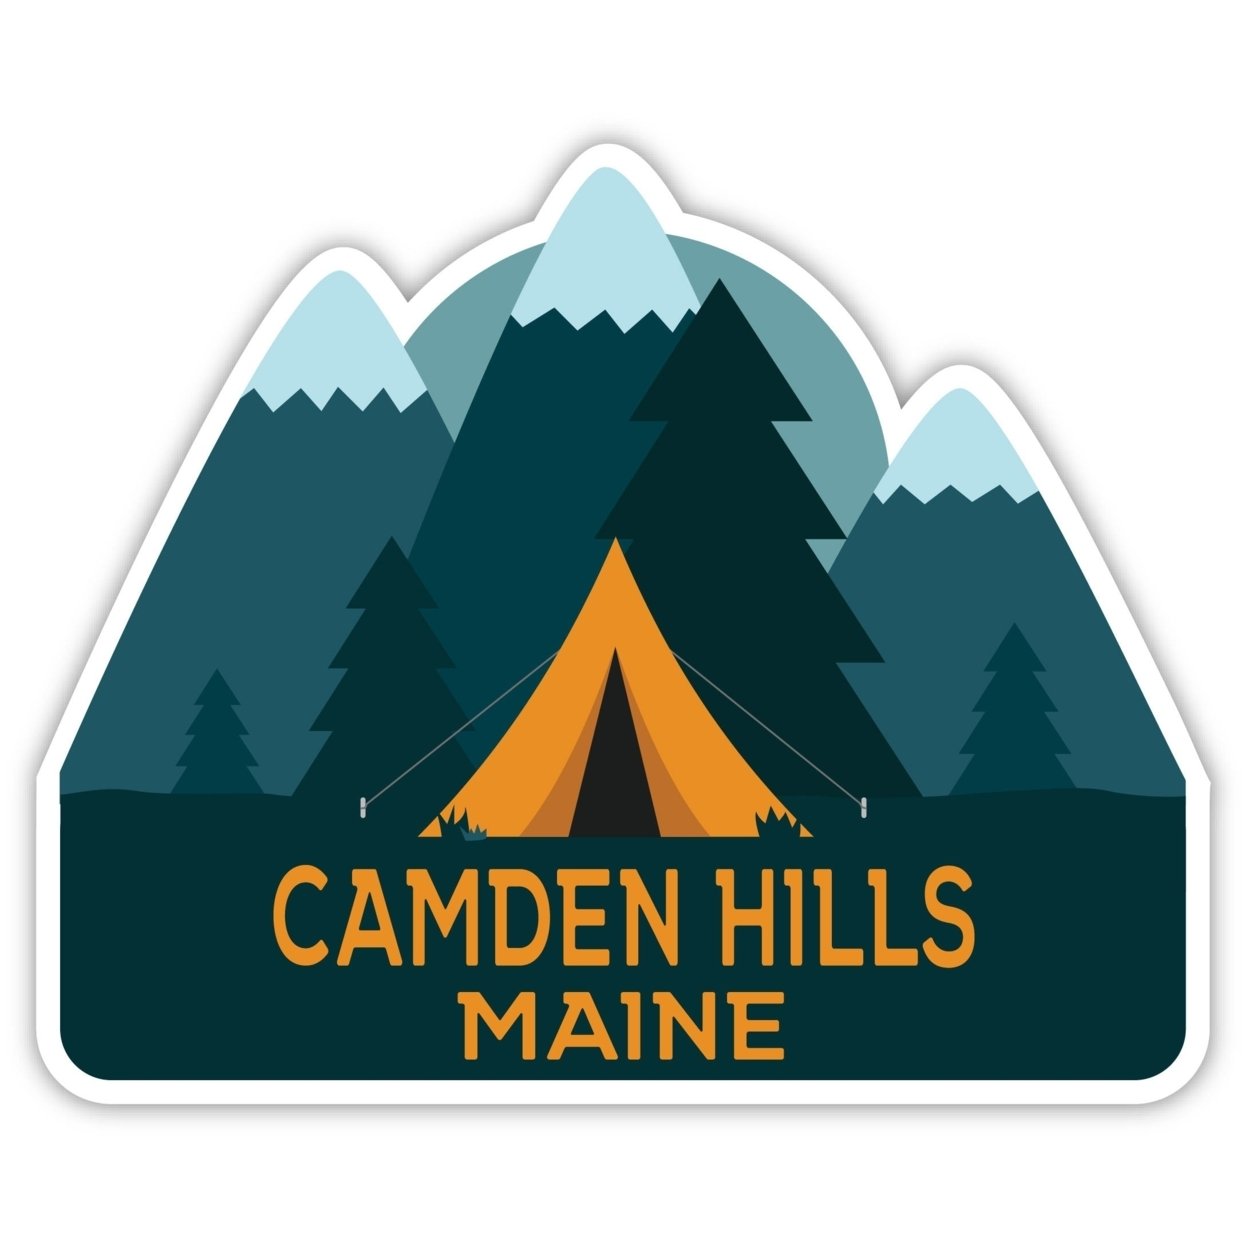 Camden Hills Maine Souvenir Decorative Stickers (Choose Theme And Size) - 4-Pack, 8-Inch, Tent